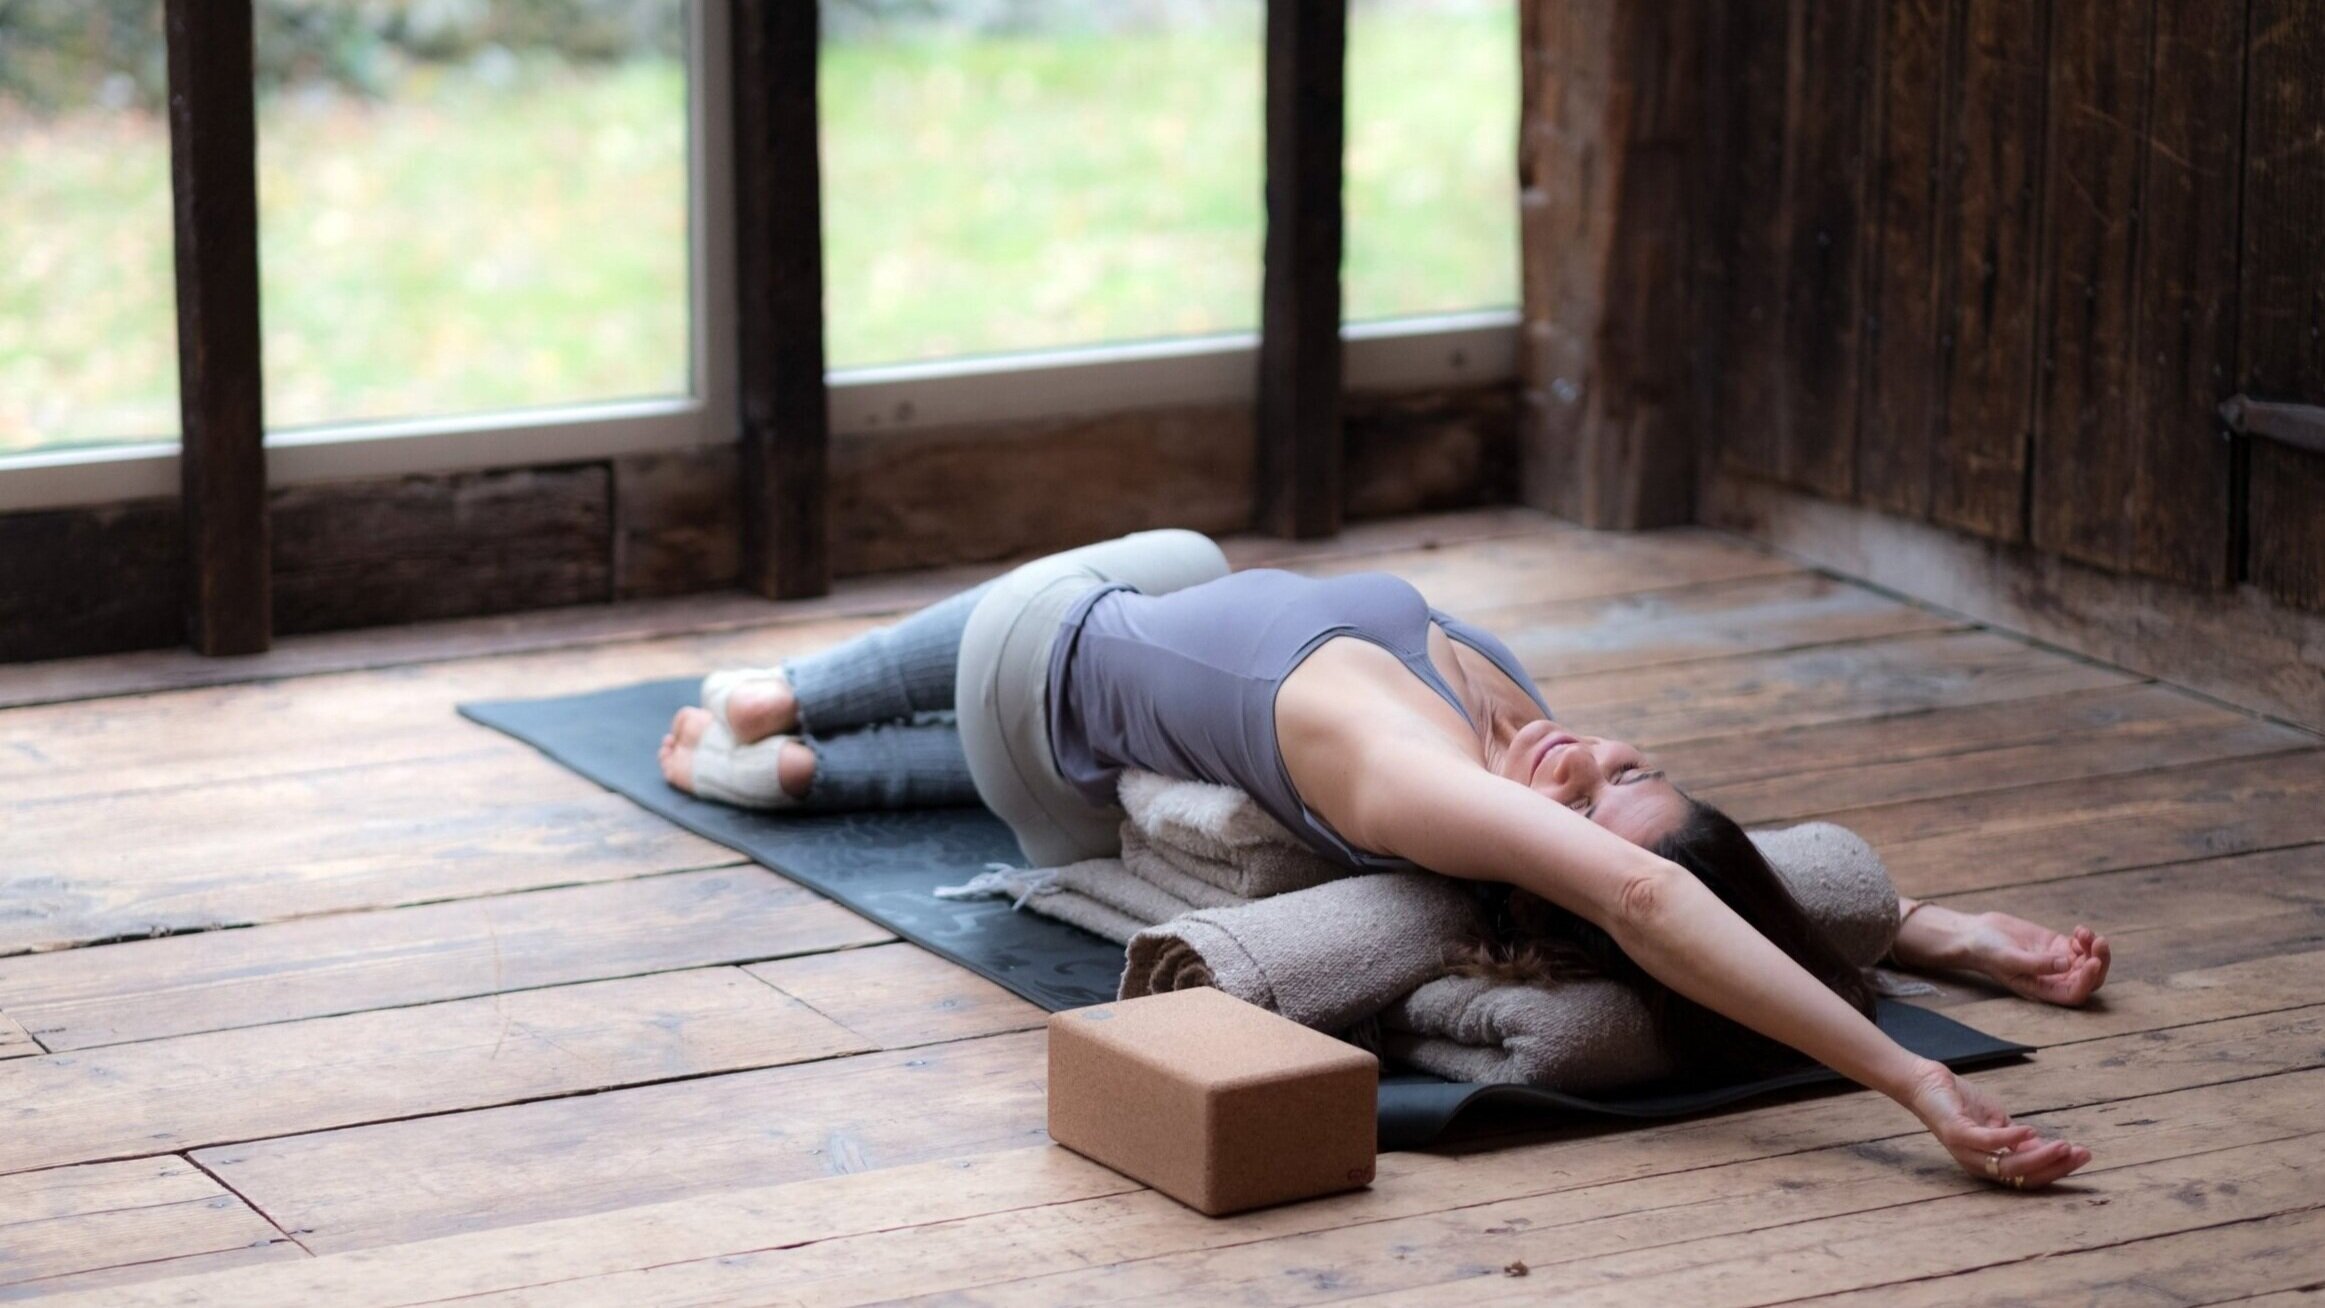 6 easy ways to add restorative yoga to your practice or teaching